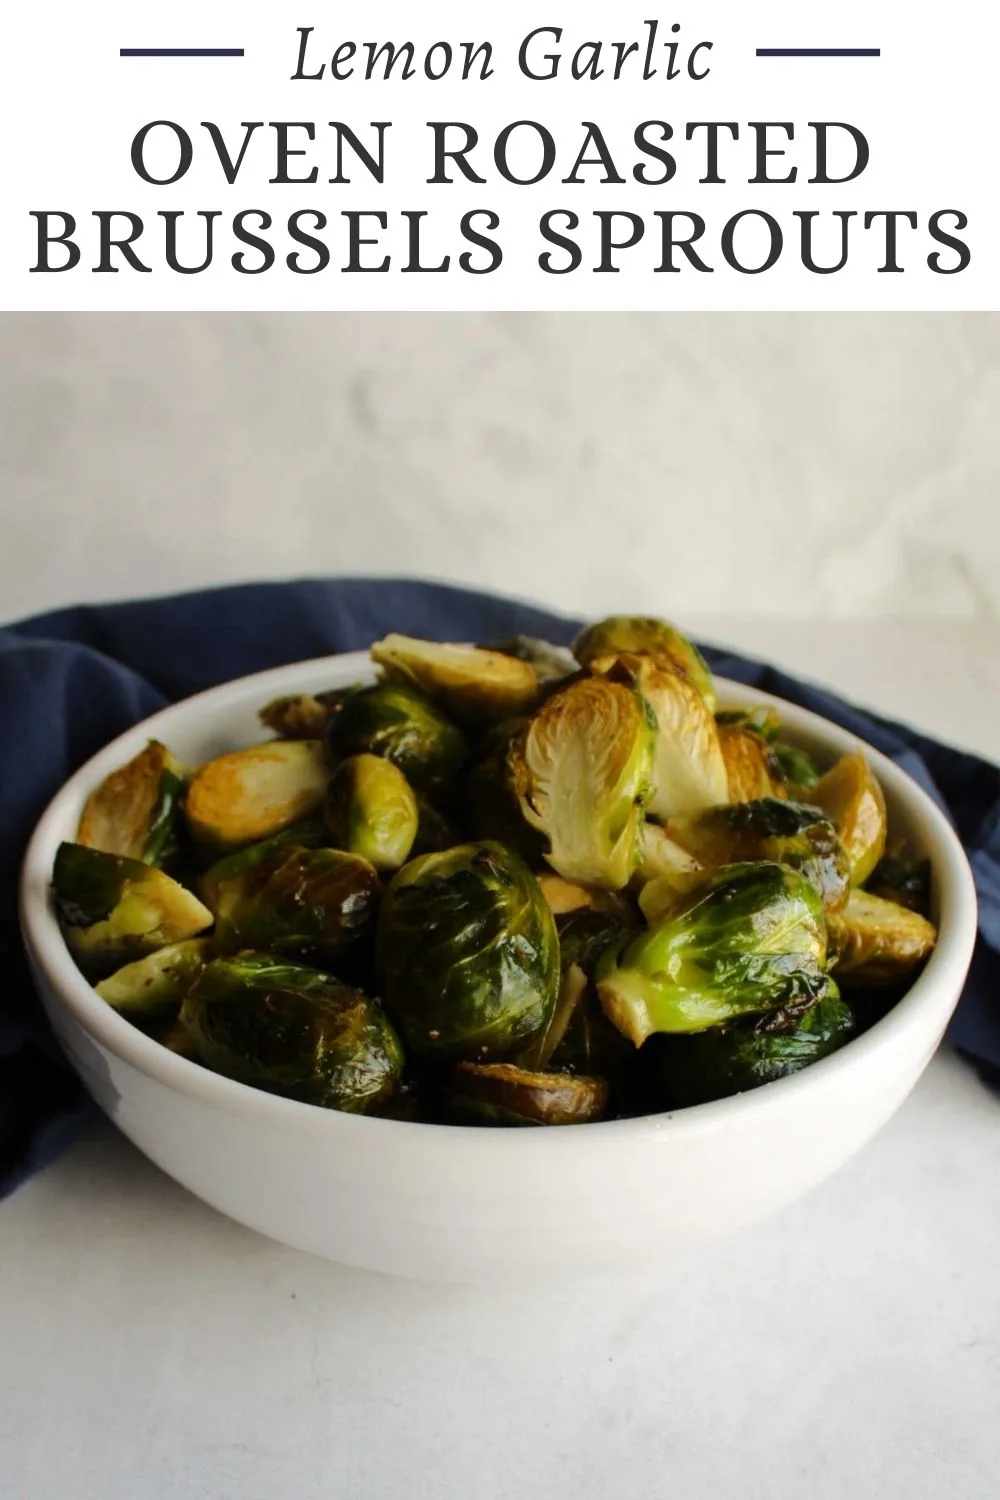 Tasty oven roasted brussels sprouts have a tender inside and bits of crispy goodness on the outside. This recipe takes the often maligned vegetables and turns them into a delicious side dish.